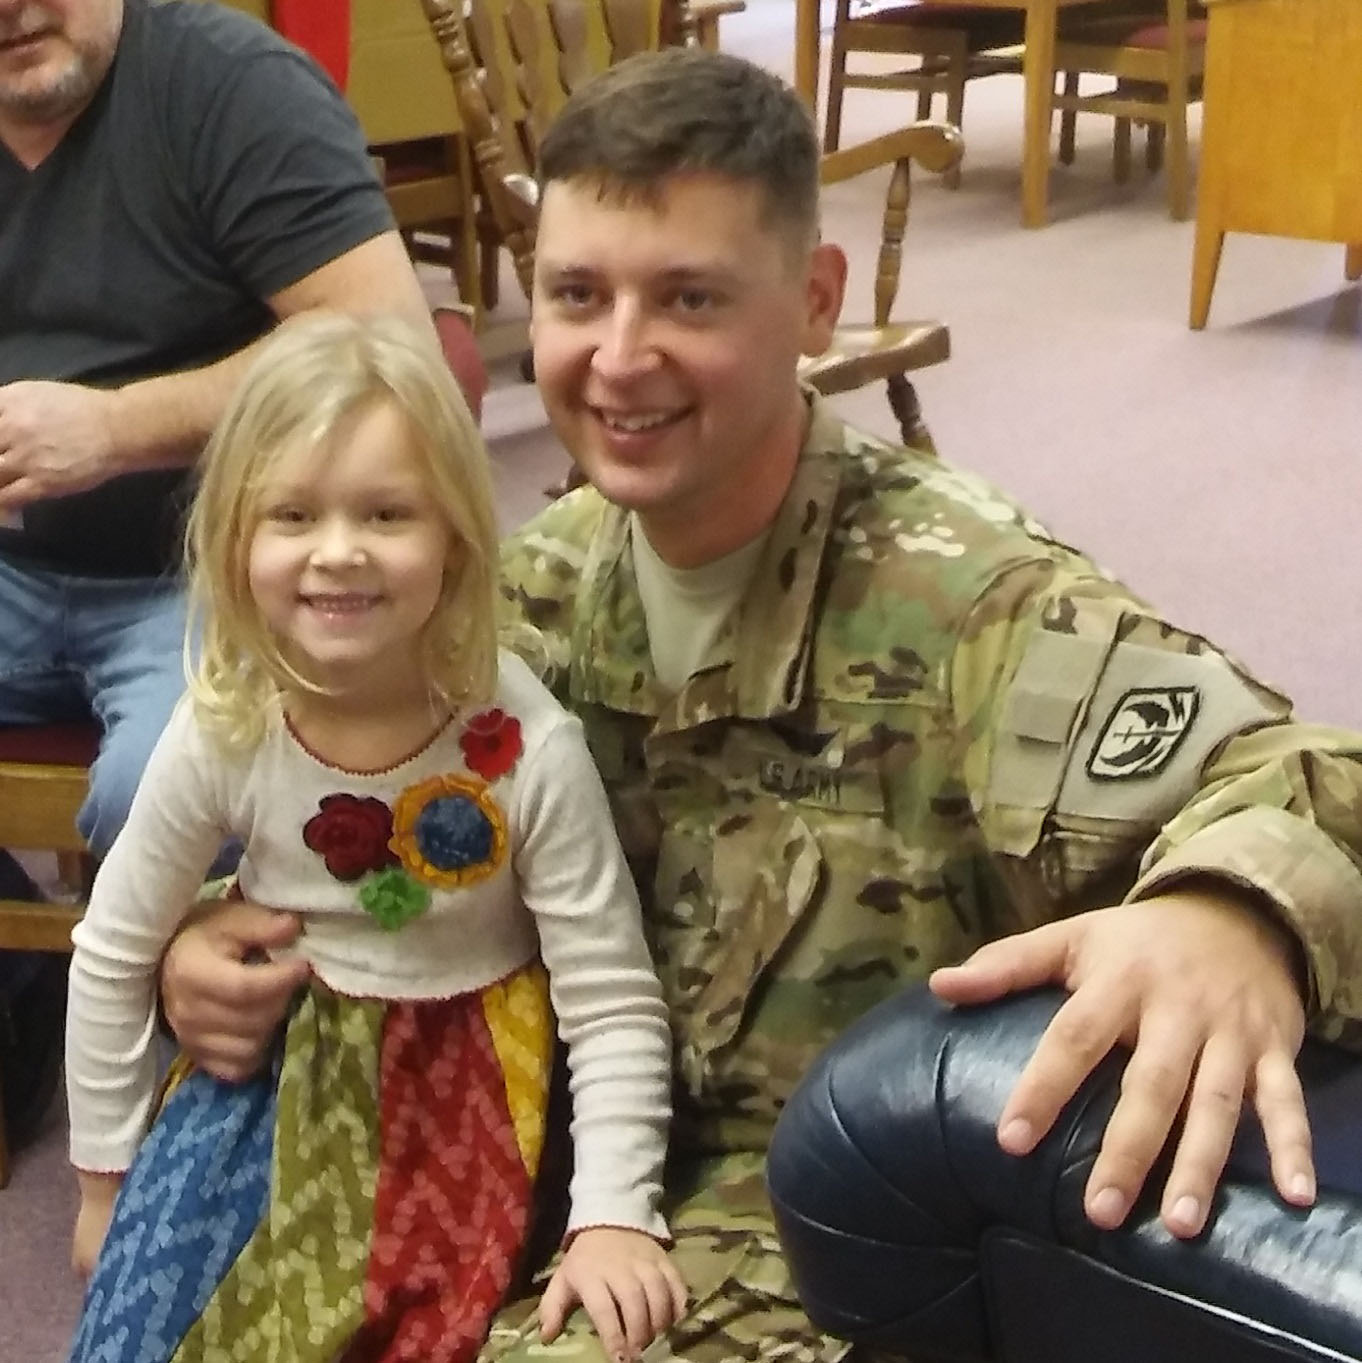 PHOTO: Sgt. George Gazeley surprised his 5-year-old daughter, Autumn, at her school after a 10-month military deployment.
